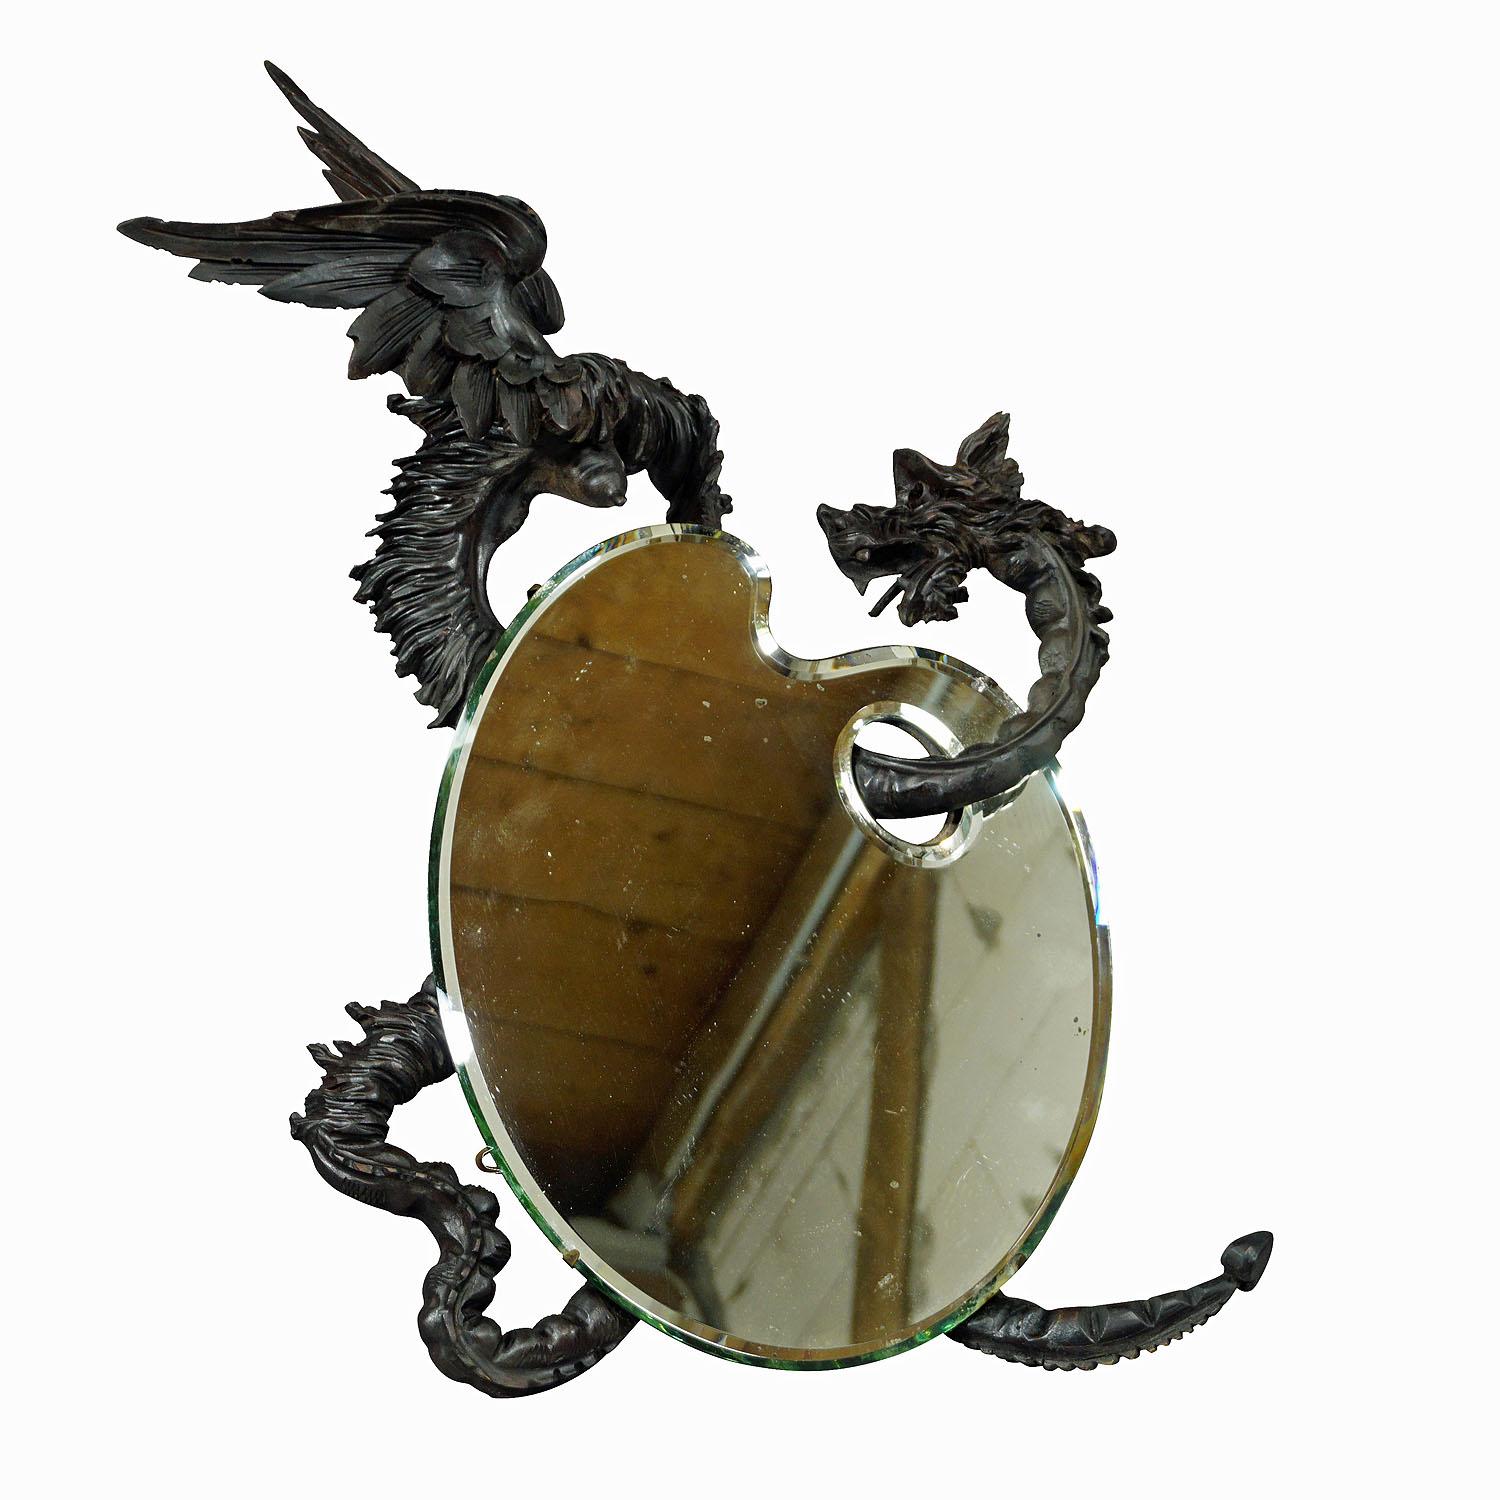 A great Victorian mirror in the style of Gabriel Viardot. The mirror in the shape of a painters palette is held by a wooden winged dragon. Manufactured in France ca. 1880. Very good condition, mirror partly clowdy and spotted (not